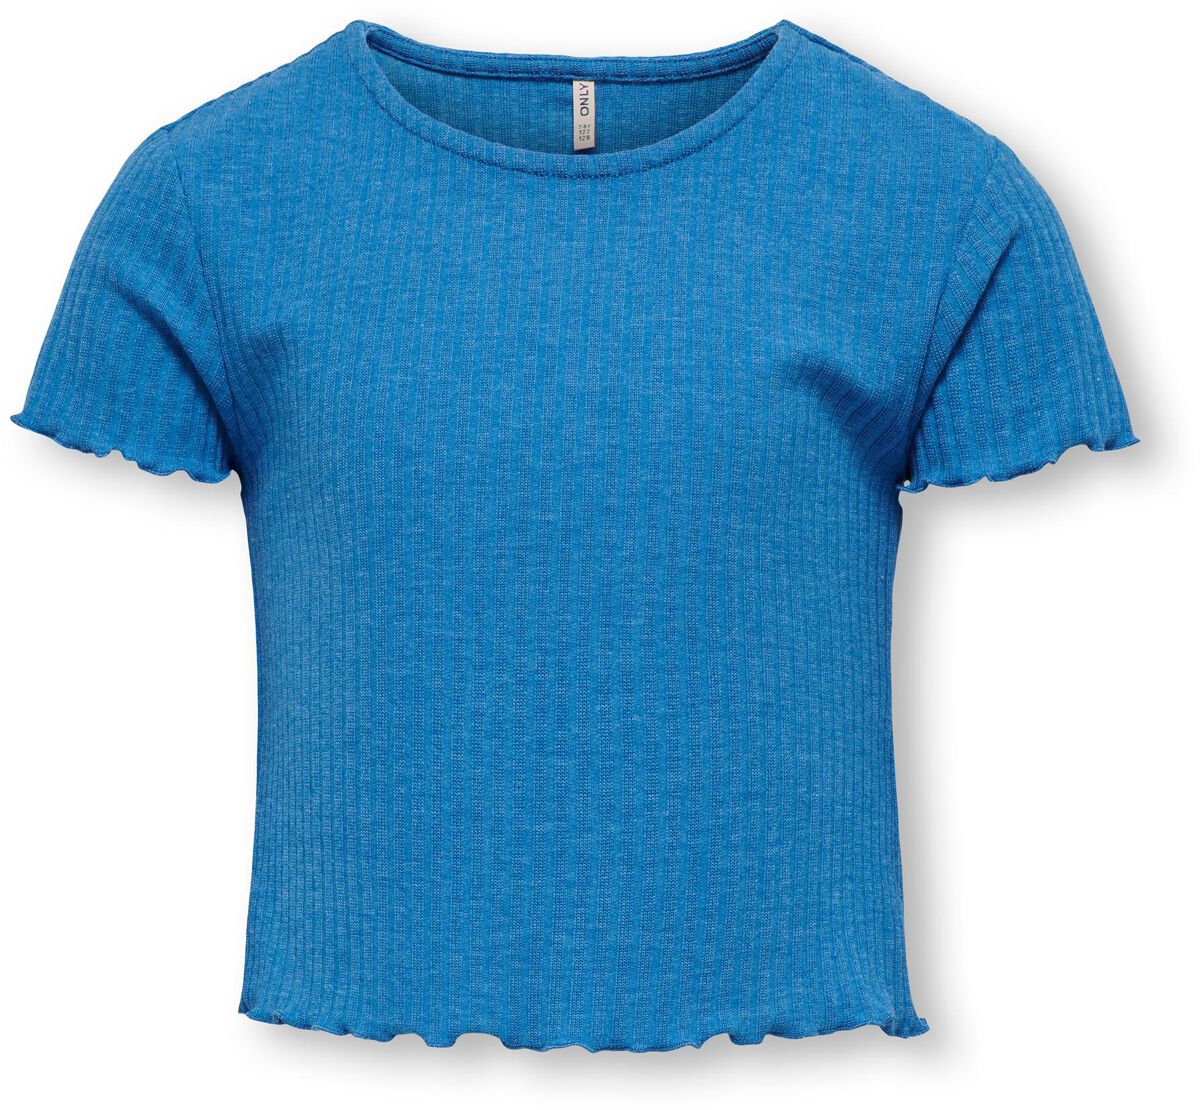 Image of T-Shirt di Kids Only - Kognella S/S O-neck top NOOS JRS - 134/140 a 158/164 - ragazze - blu